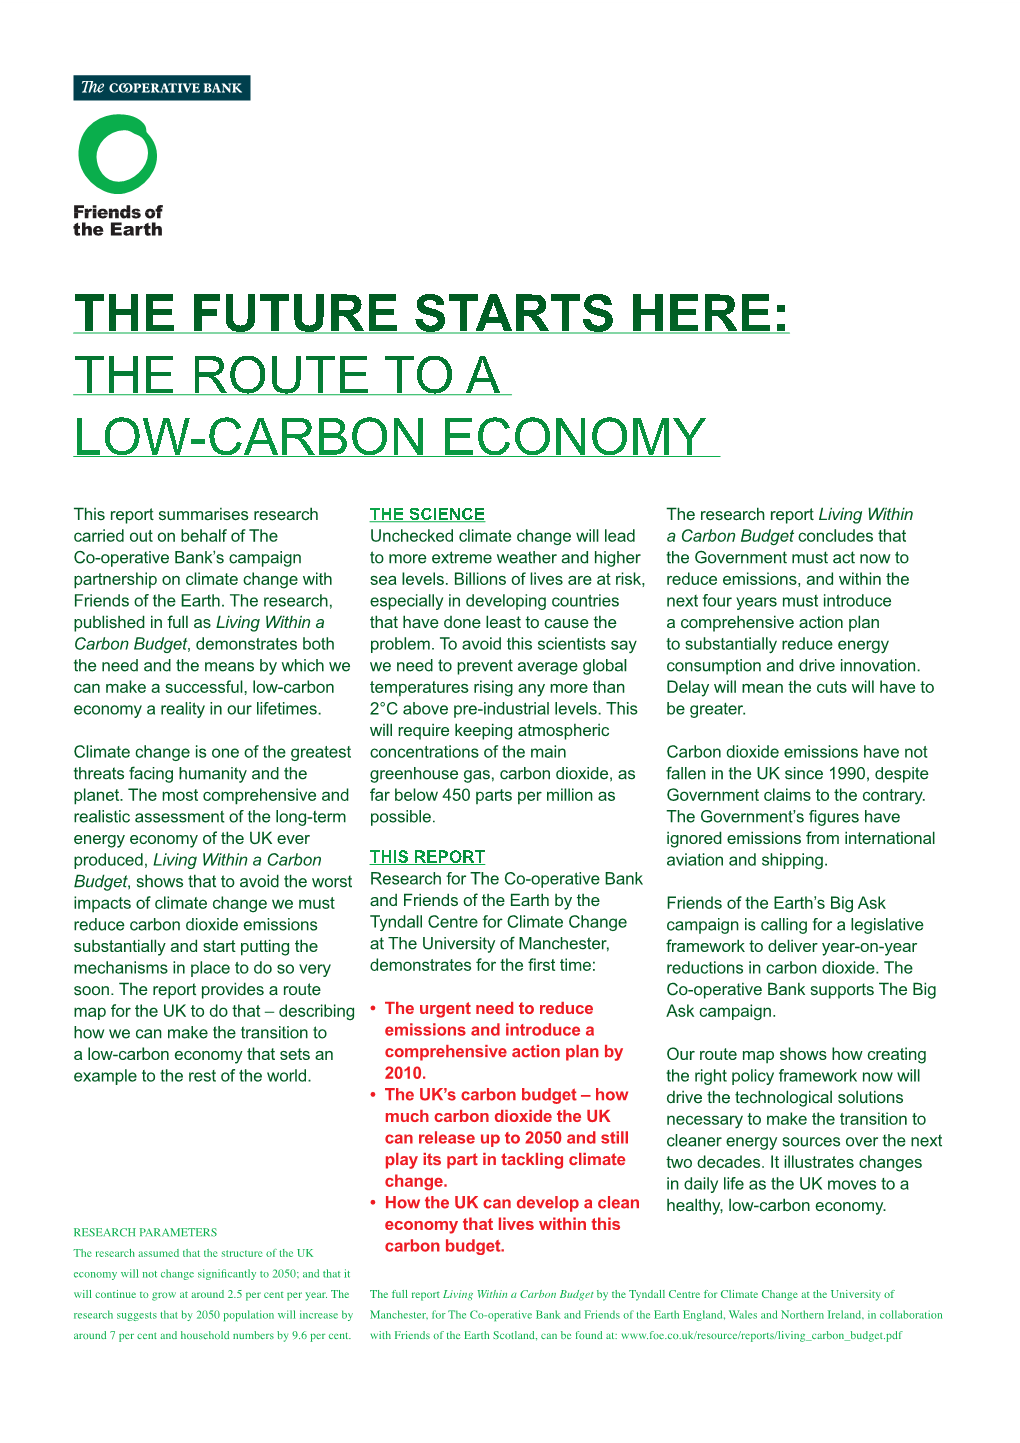 The Future Starts Here: the Route to a Low Carbon Economy